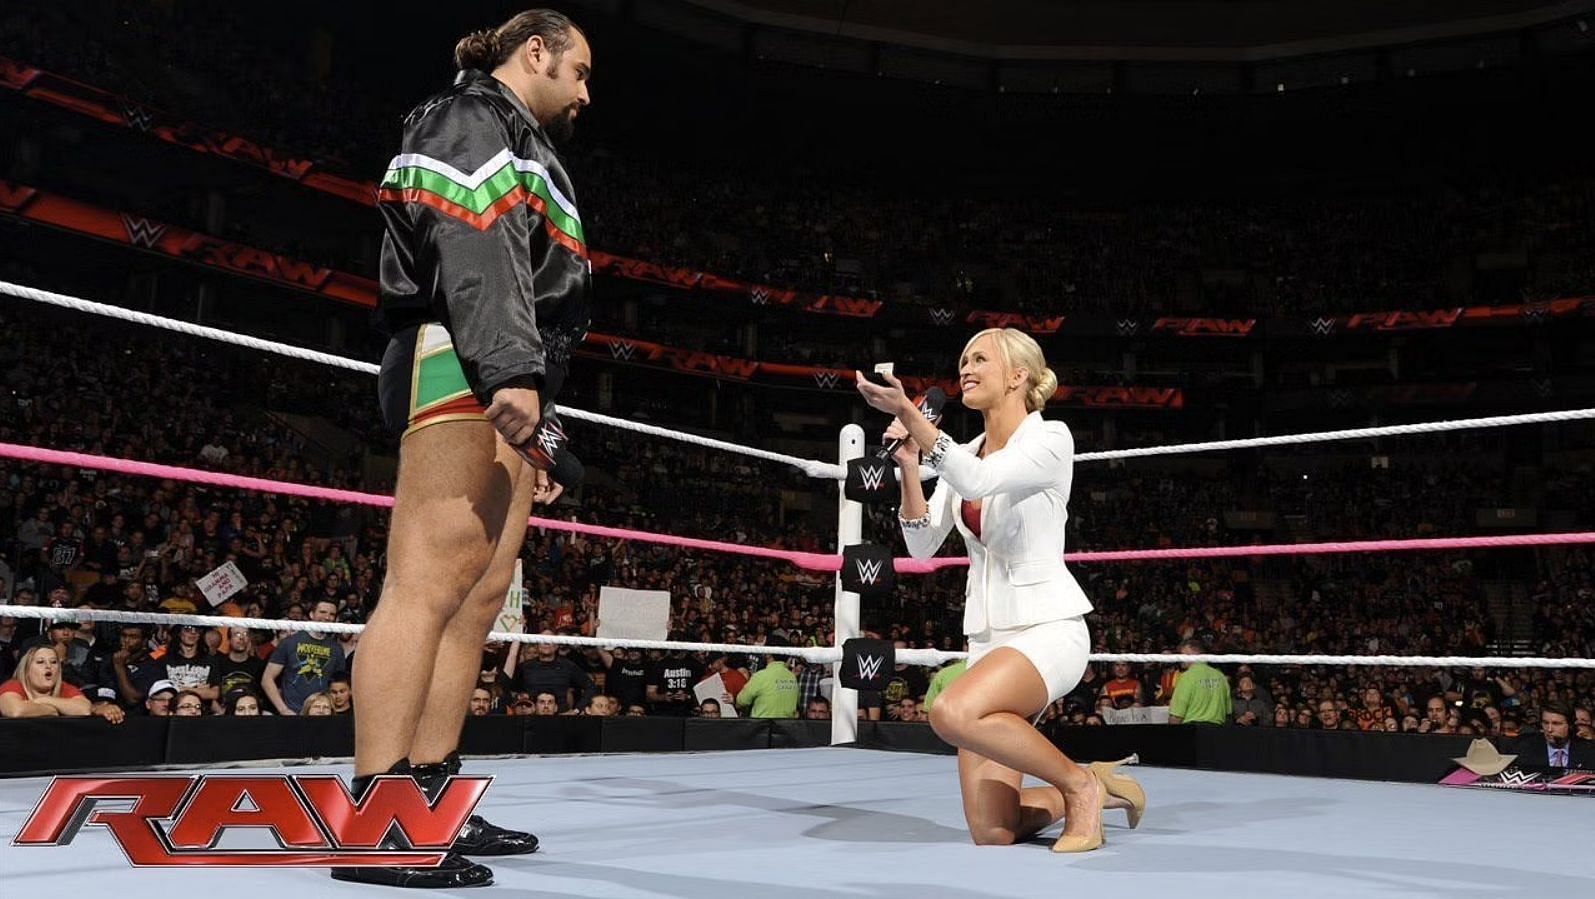 Summer Rae proposes to the Bulgarian Brute